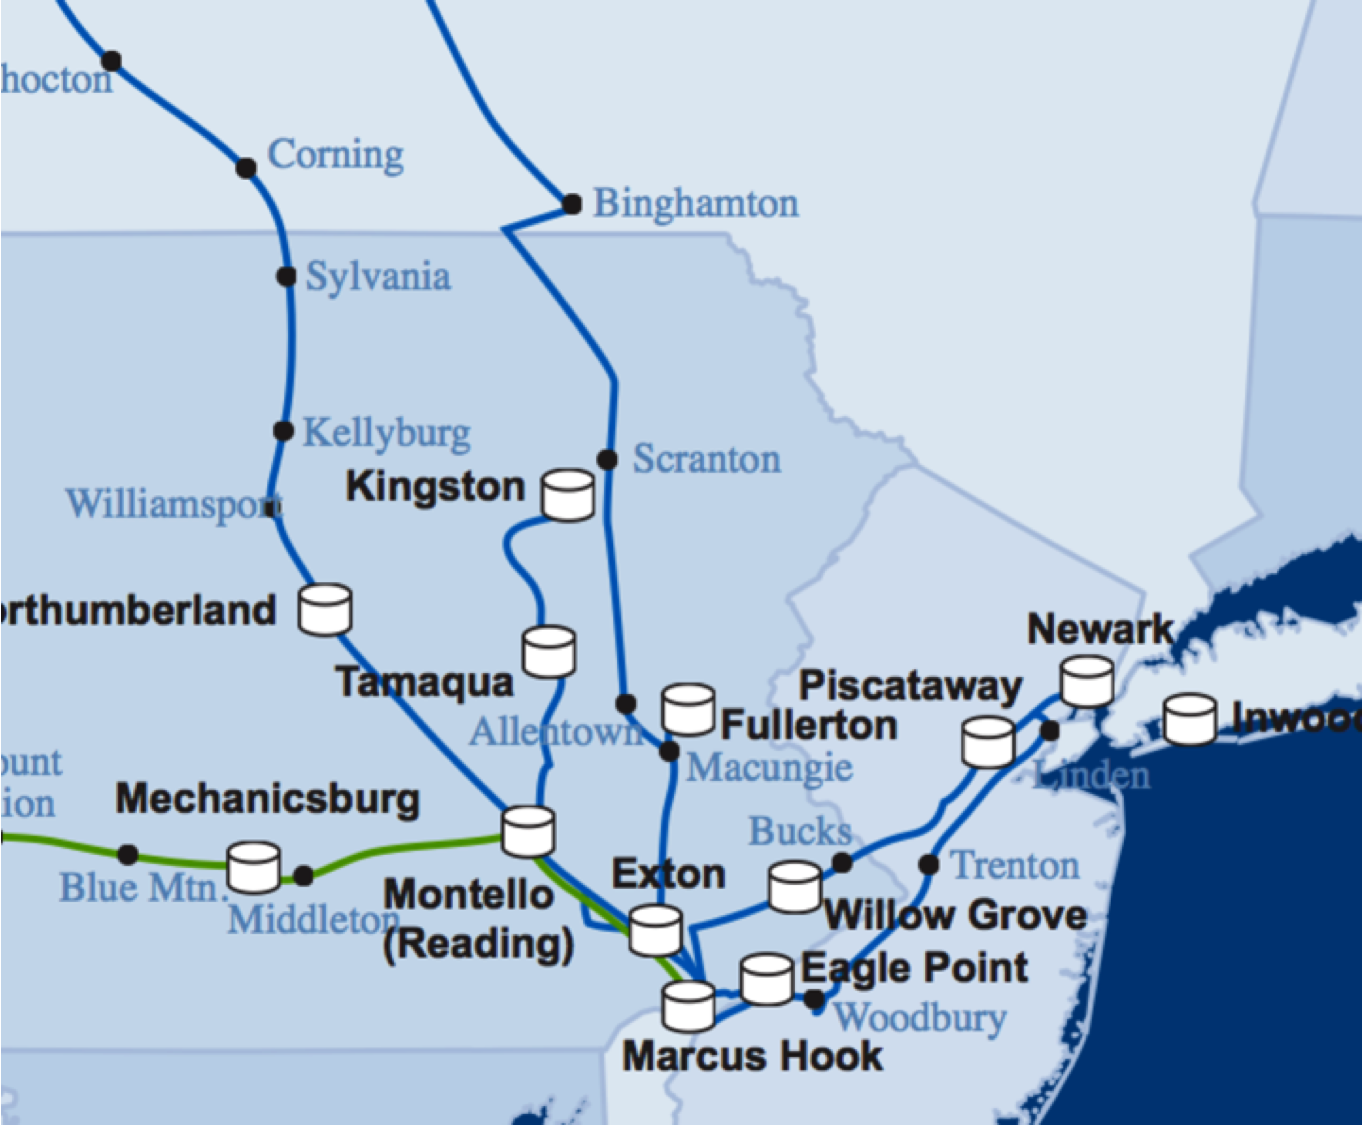 Colonial Pipeline Route / Jolfr5k Bcolmm Colonial oil products